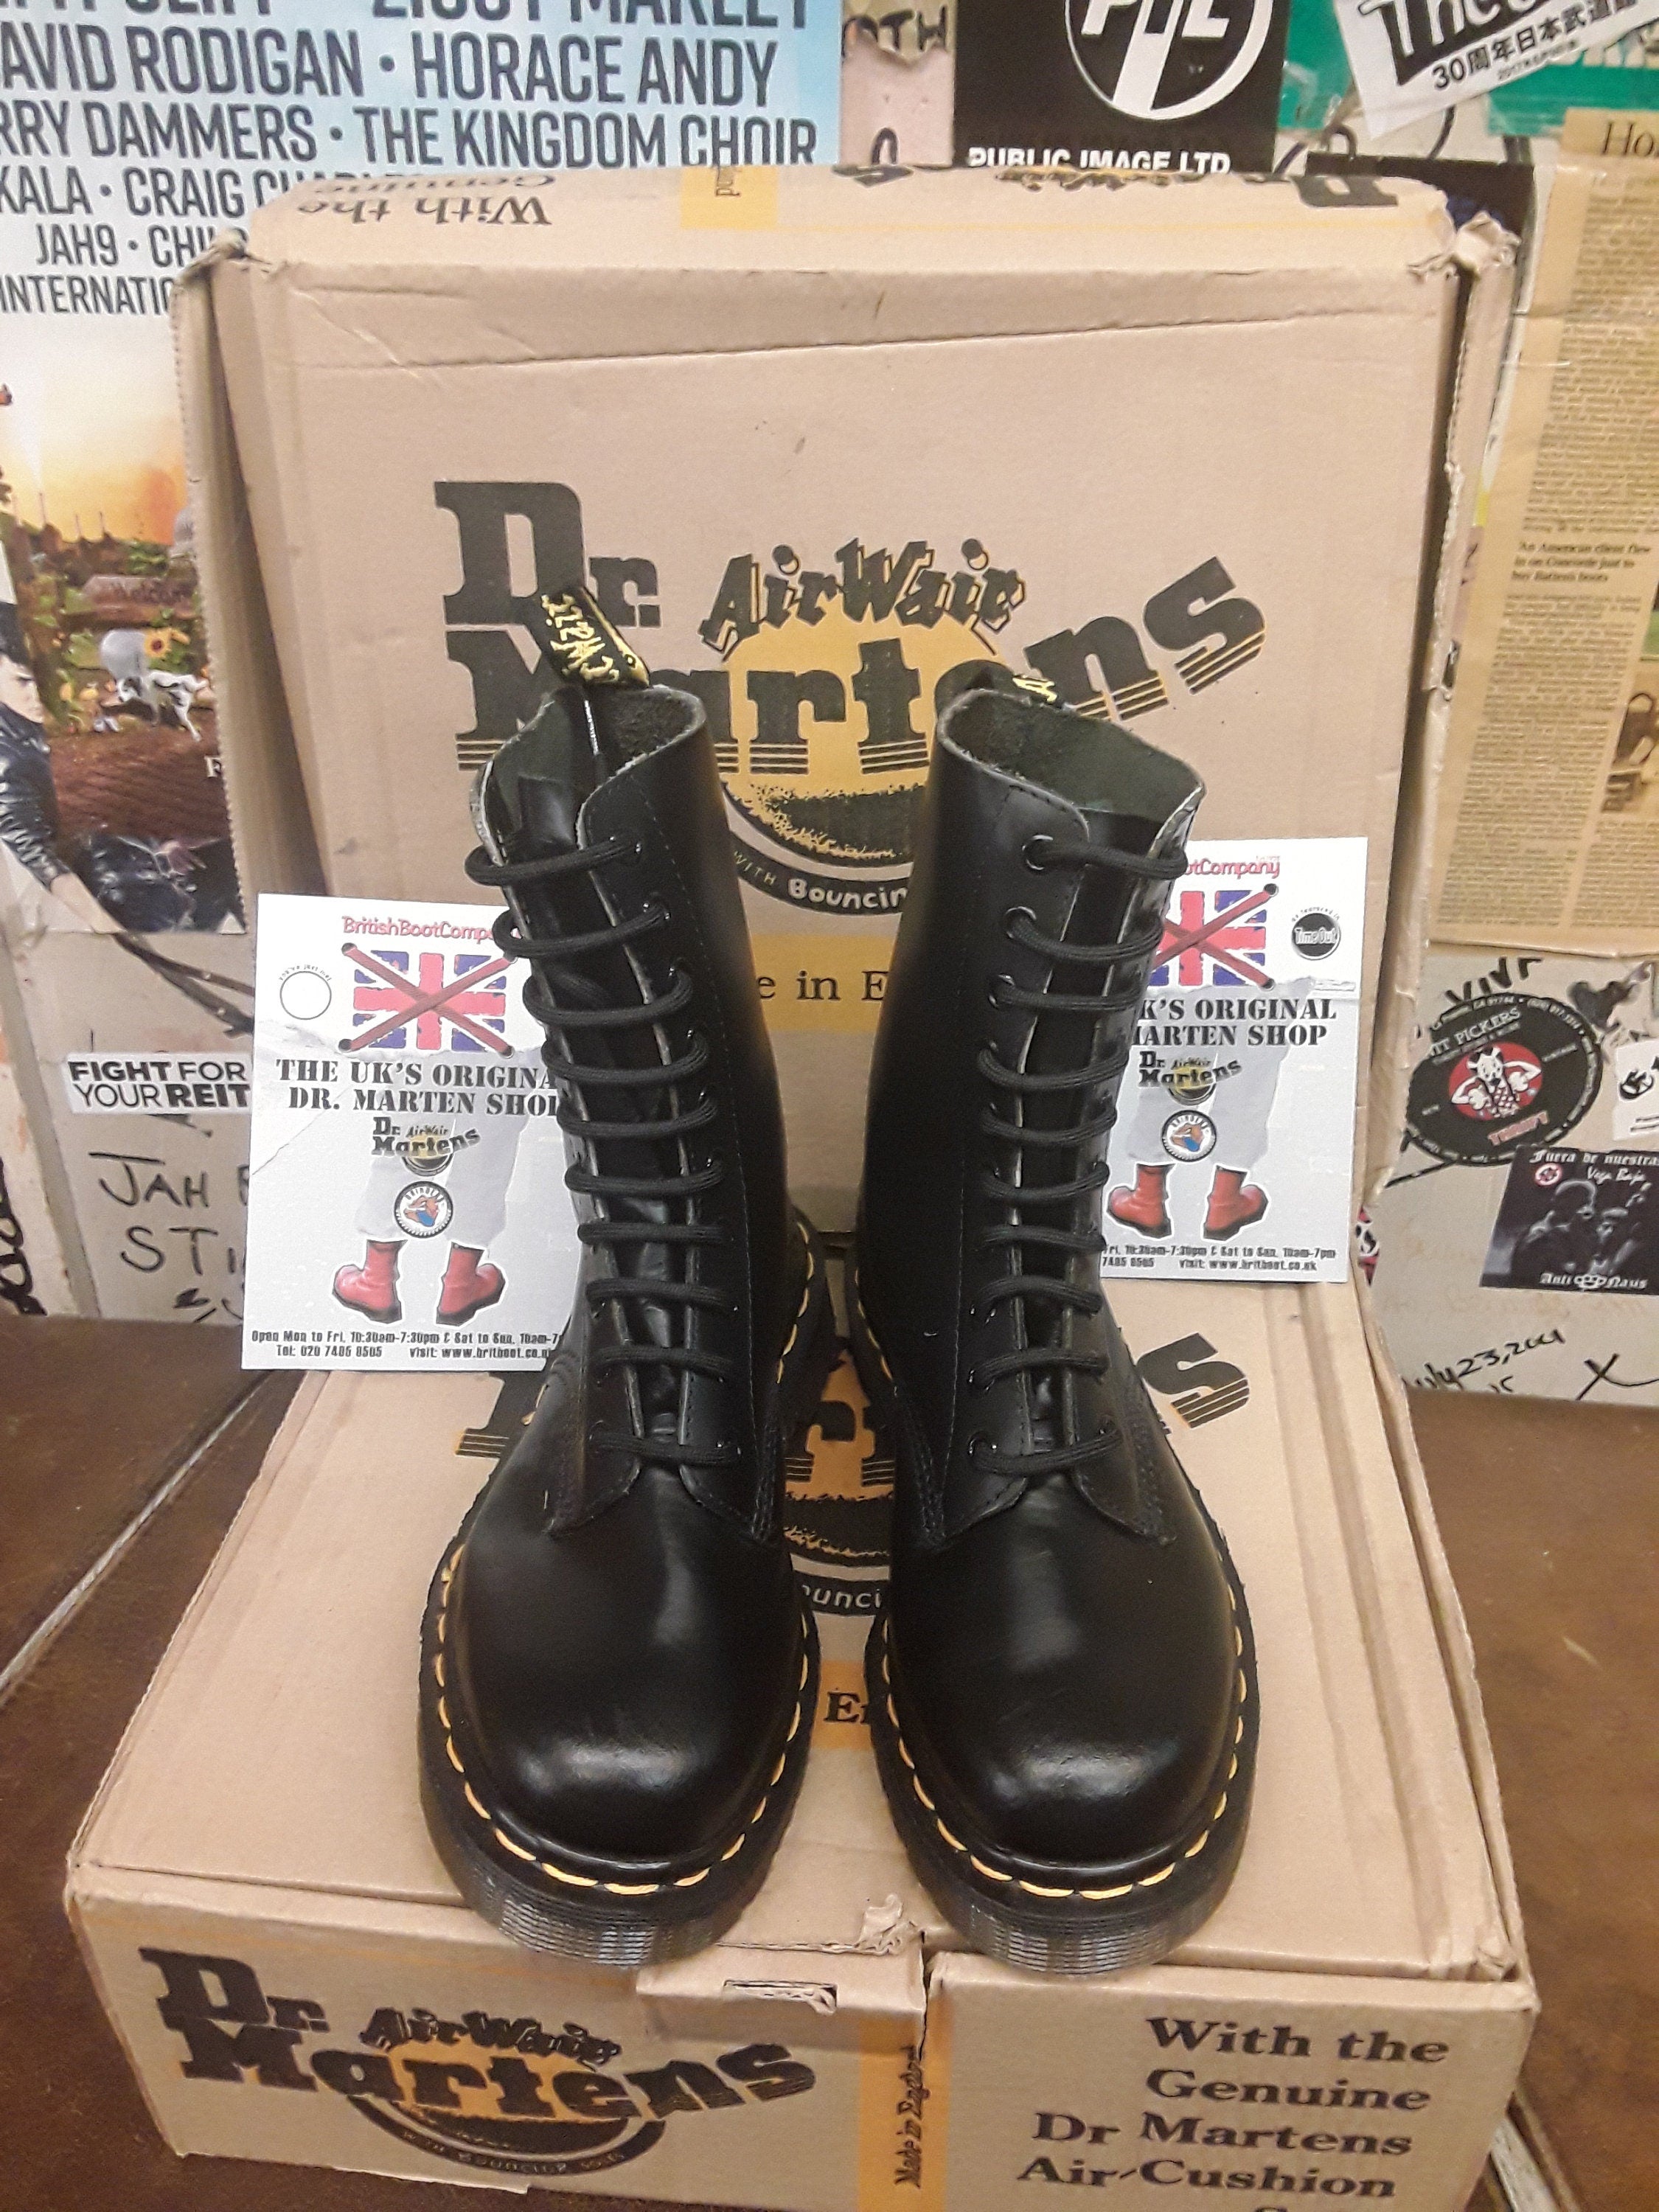 Dr Martens 1490z 10 Hole Made in England